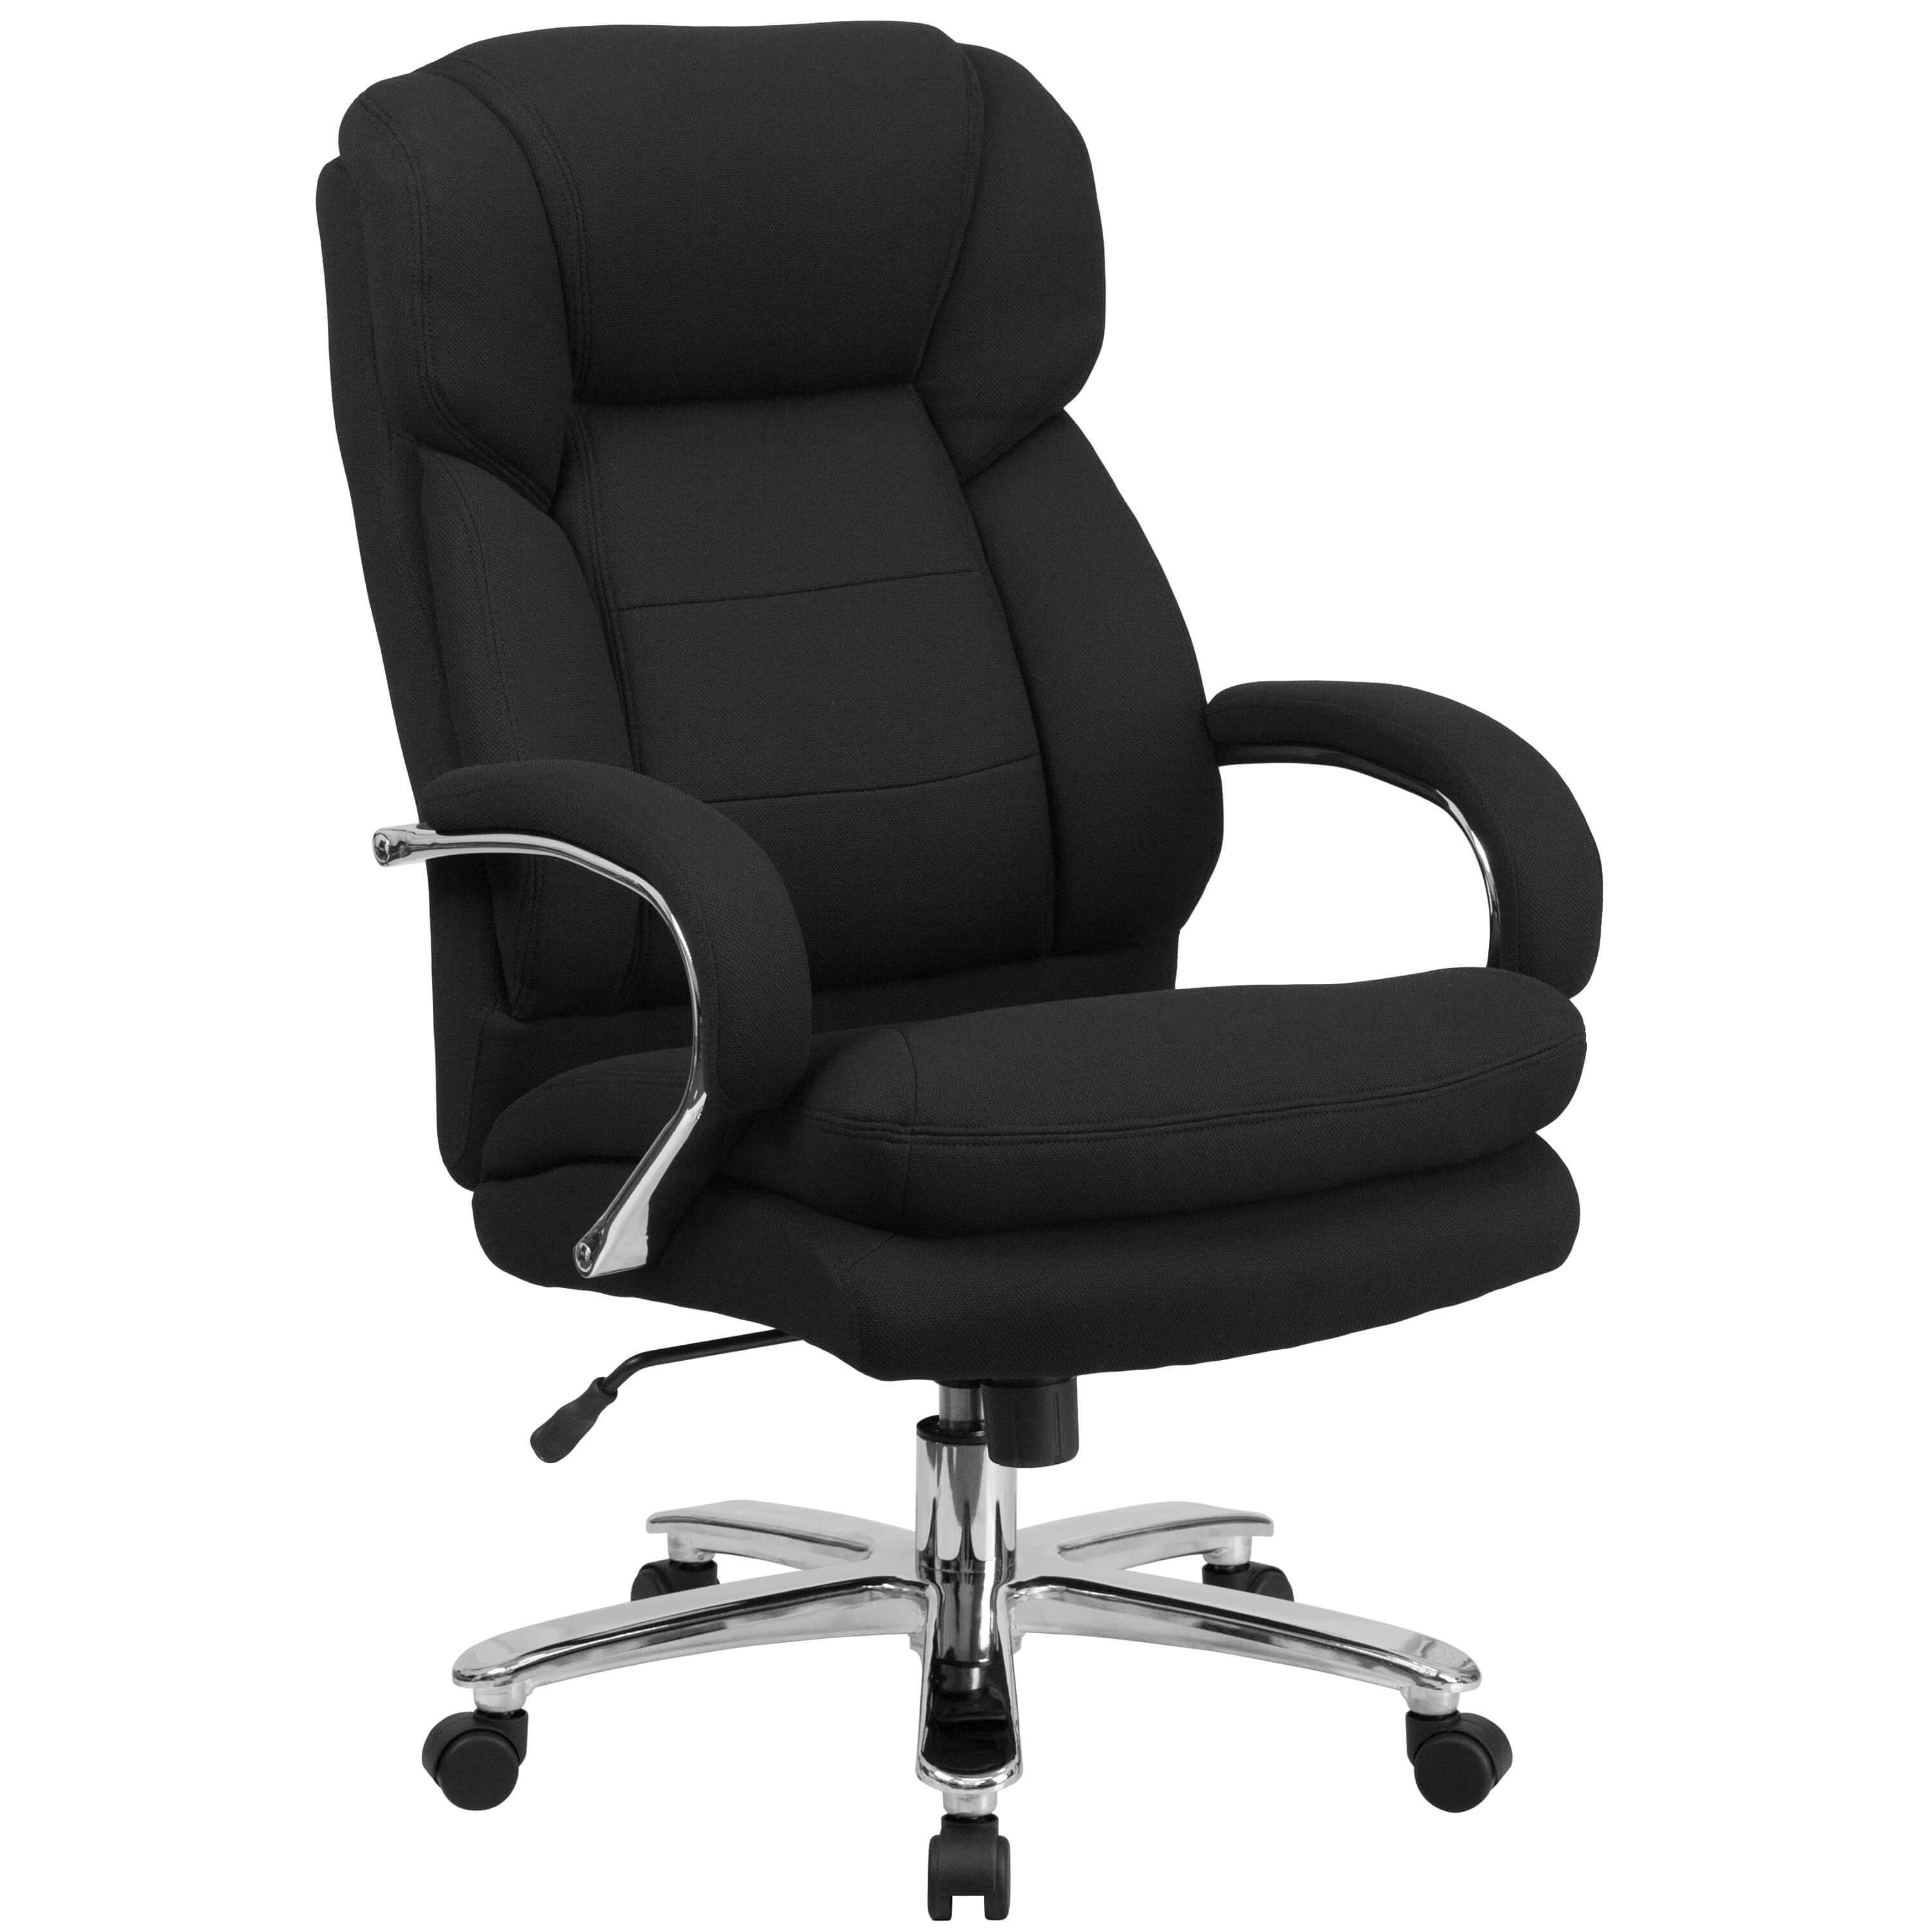 Cool office chairs heavy duty office chairs